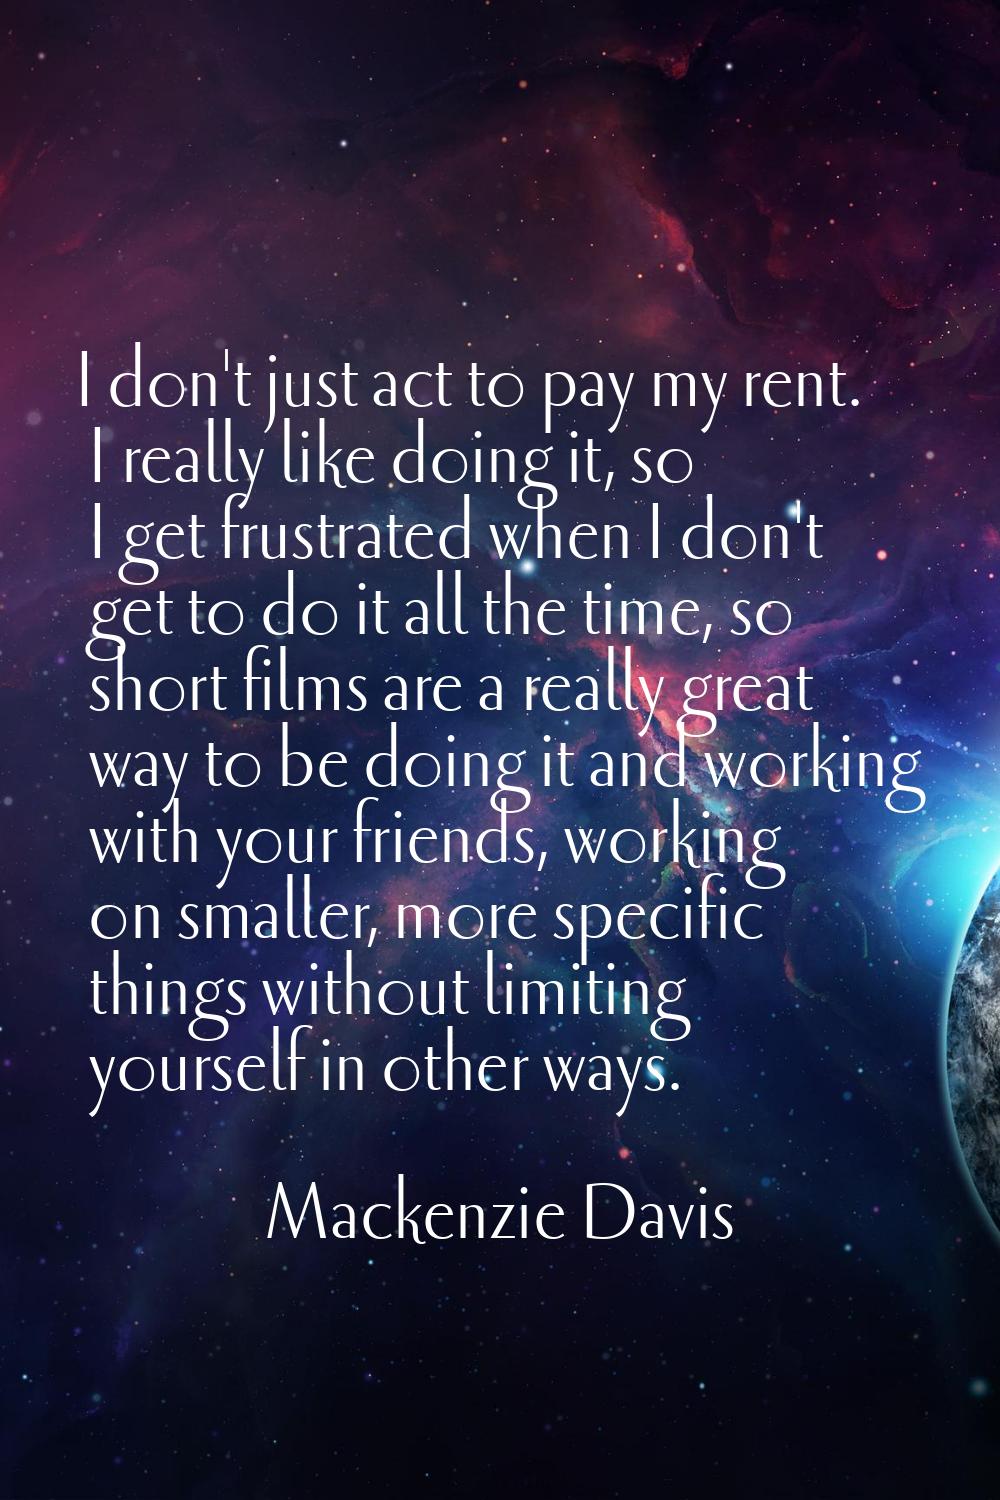 I don't just act to pay my rent. I really like doing it, so I get frustrated when I don't get to do